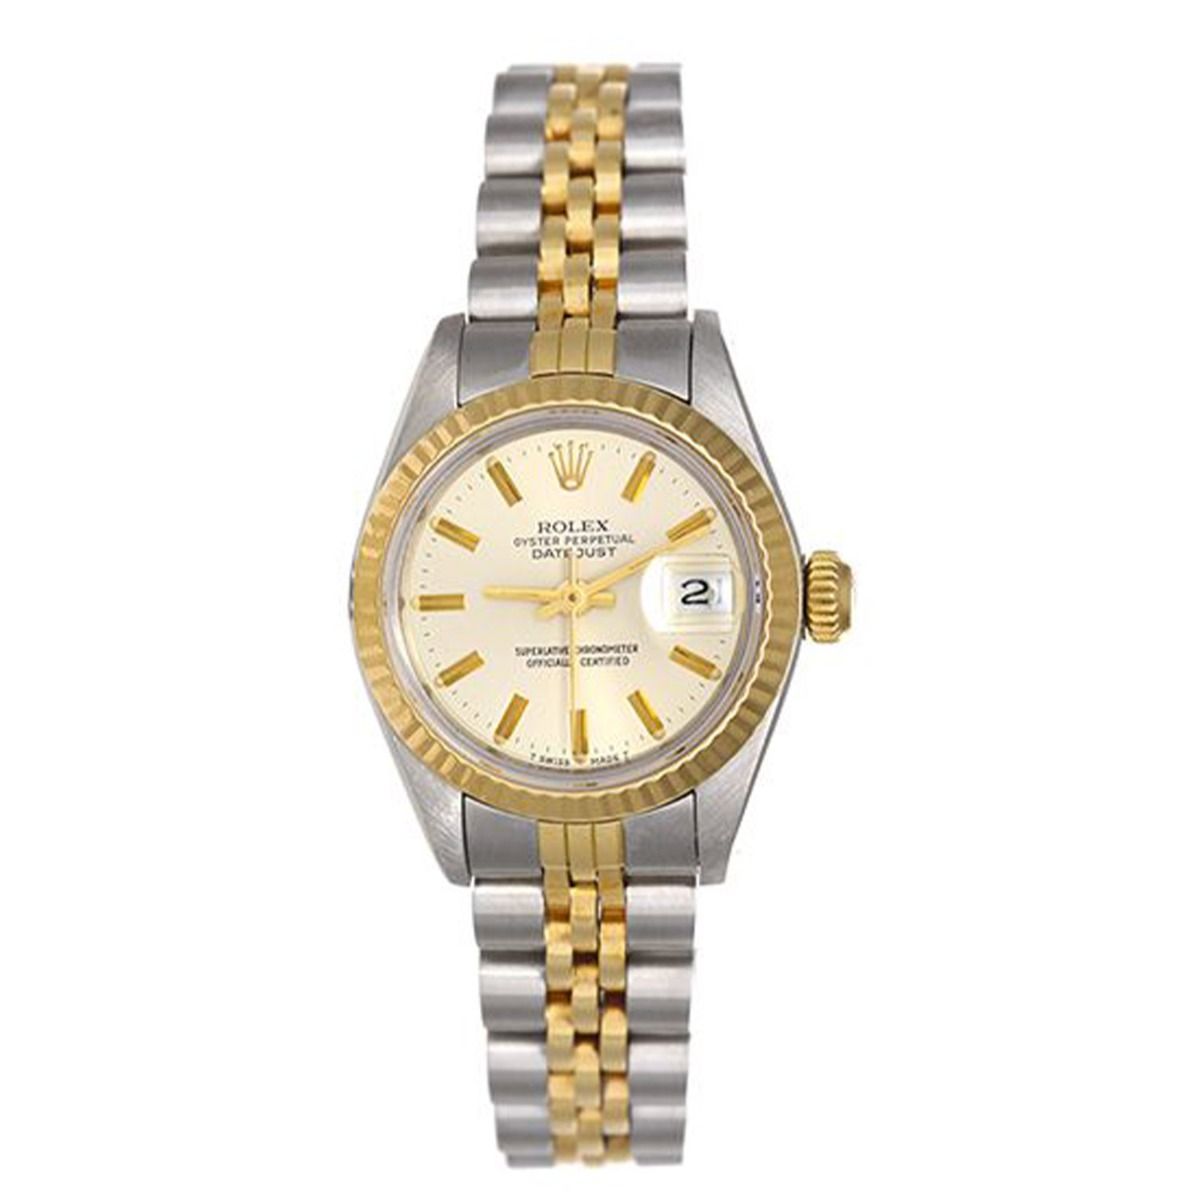 dictionary See insects terrace womens rolex brand Ladder Dwelling